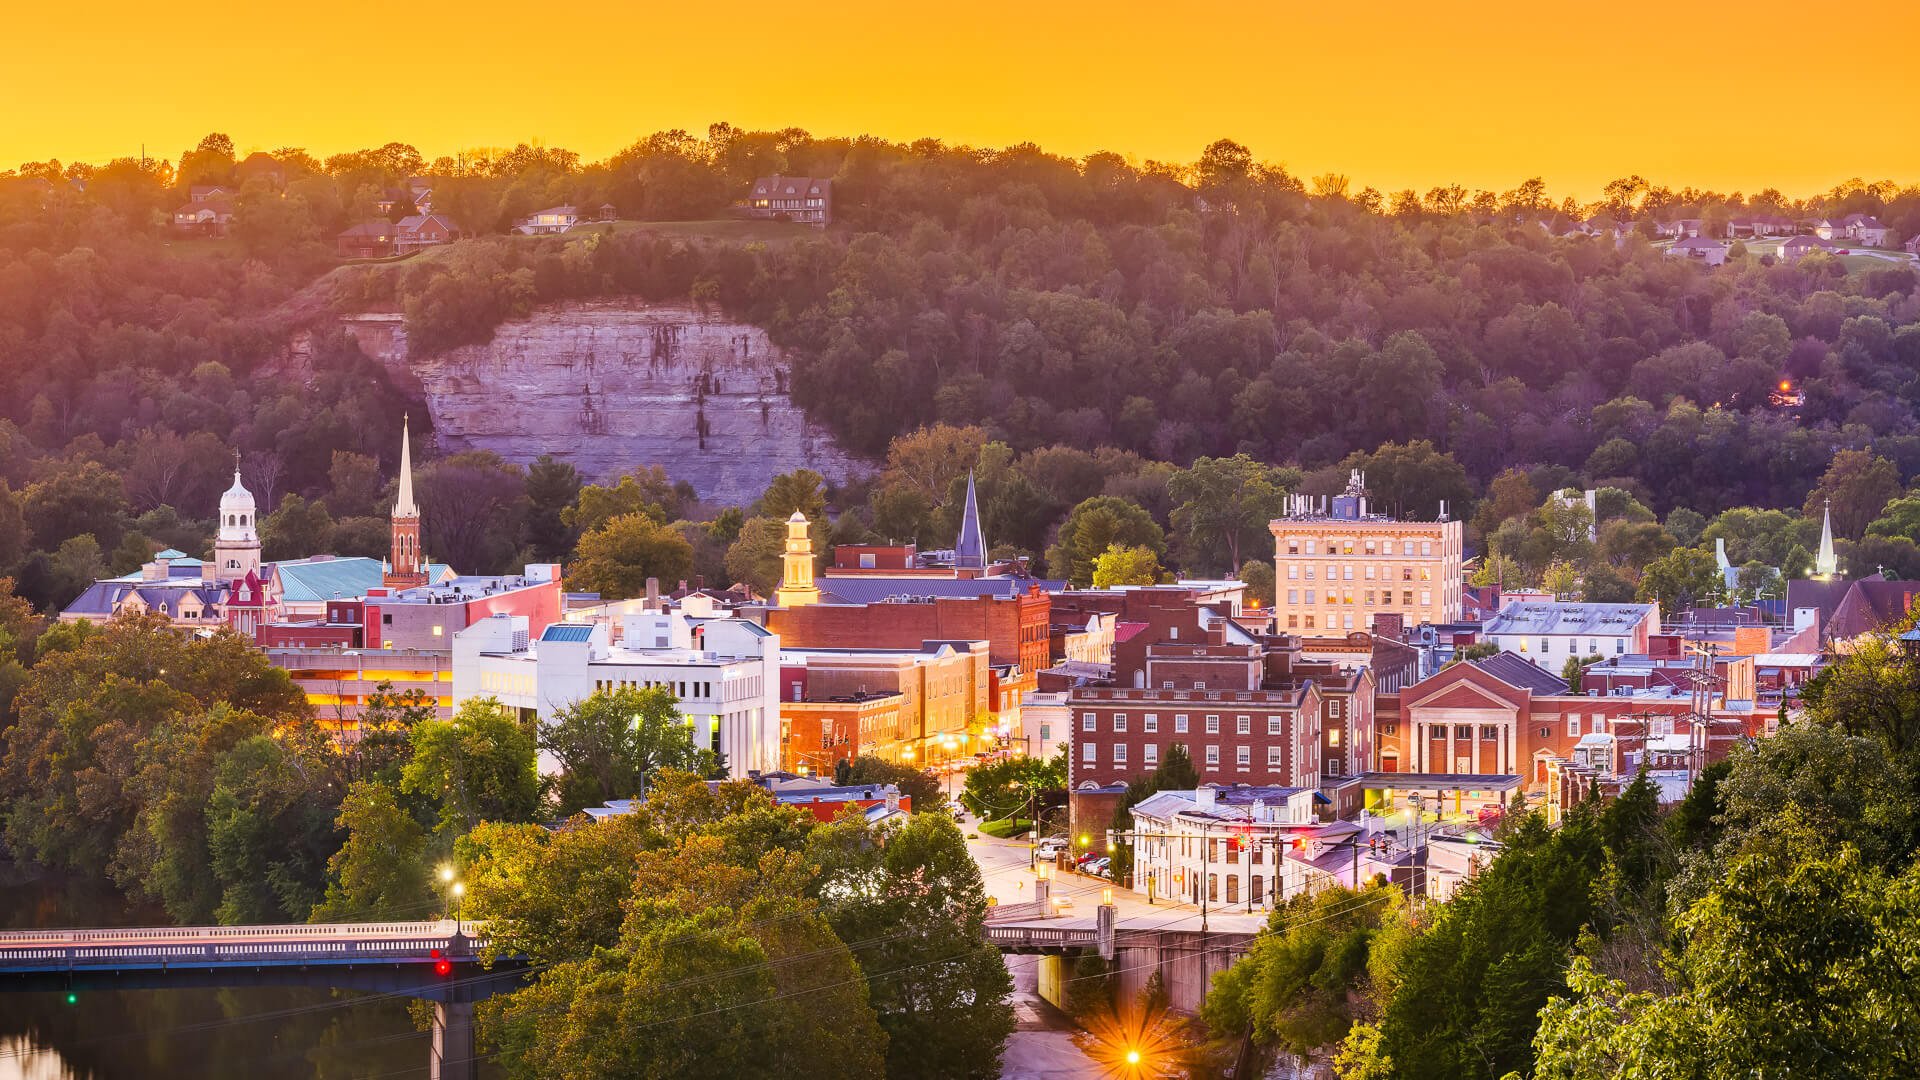 10 Best Small Towns To Retire on $4,000 a Month